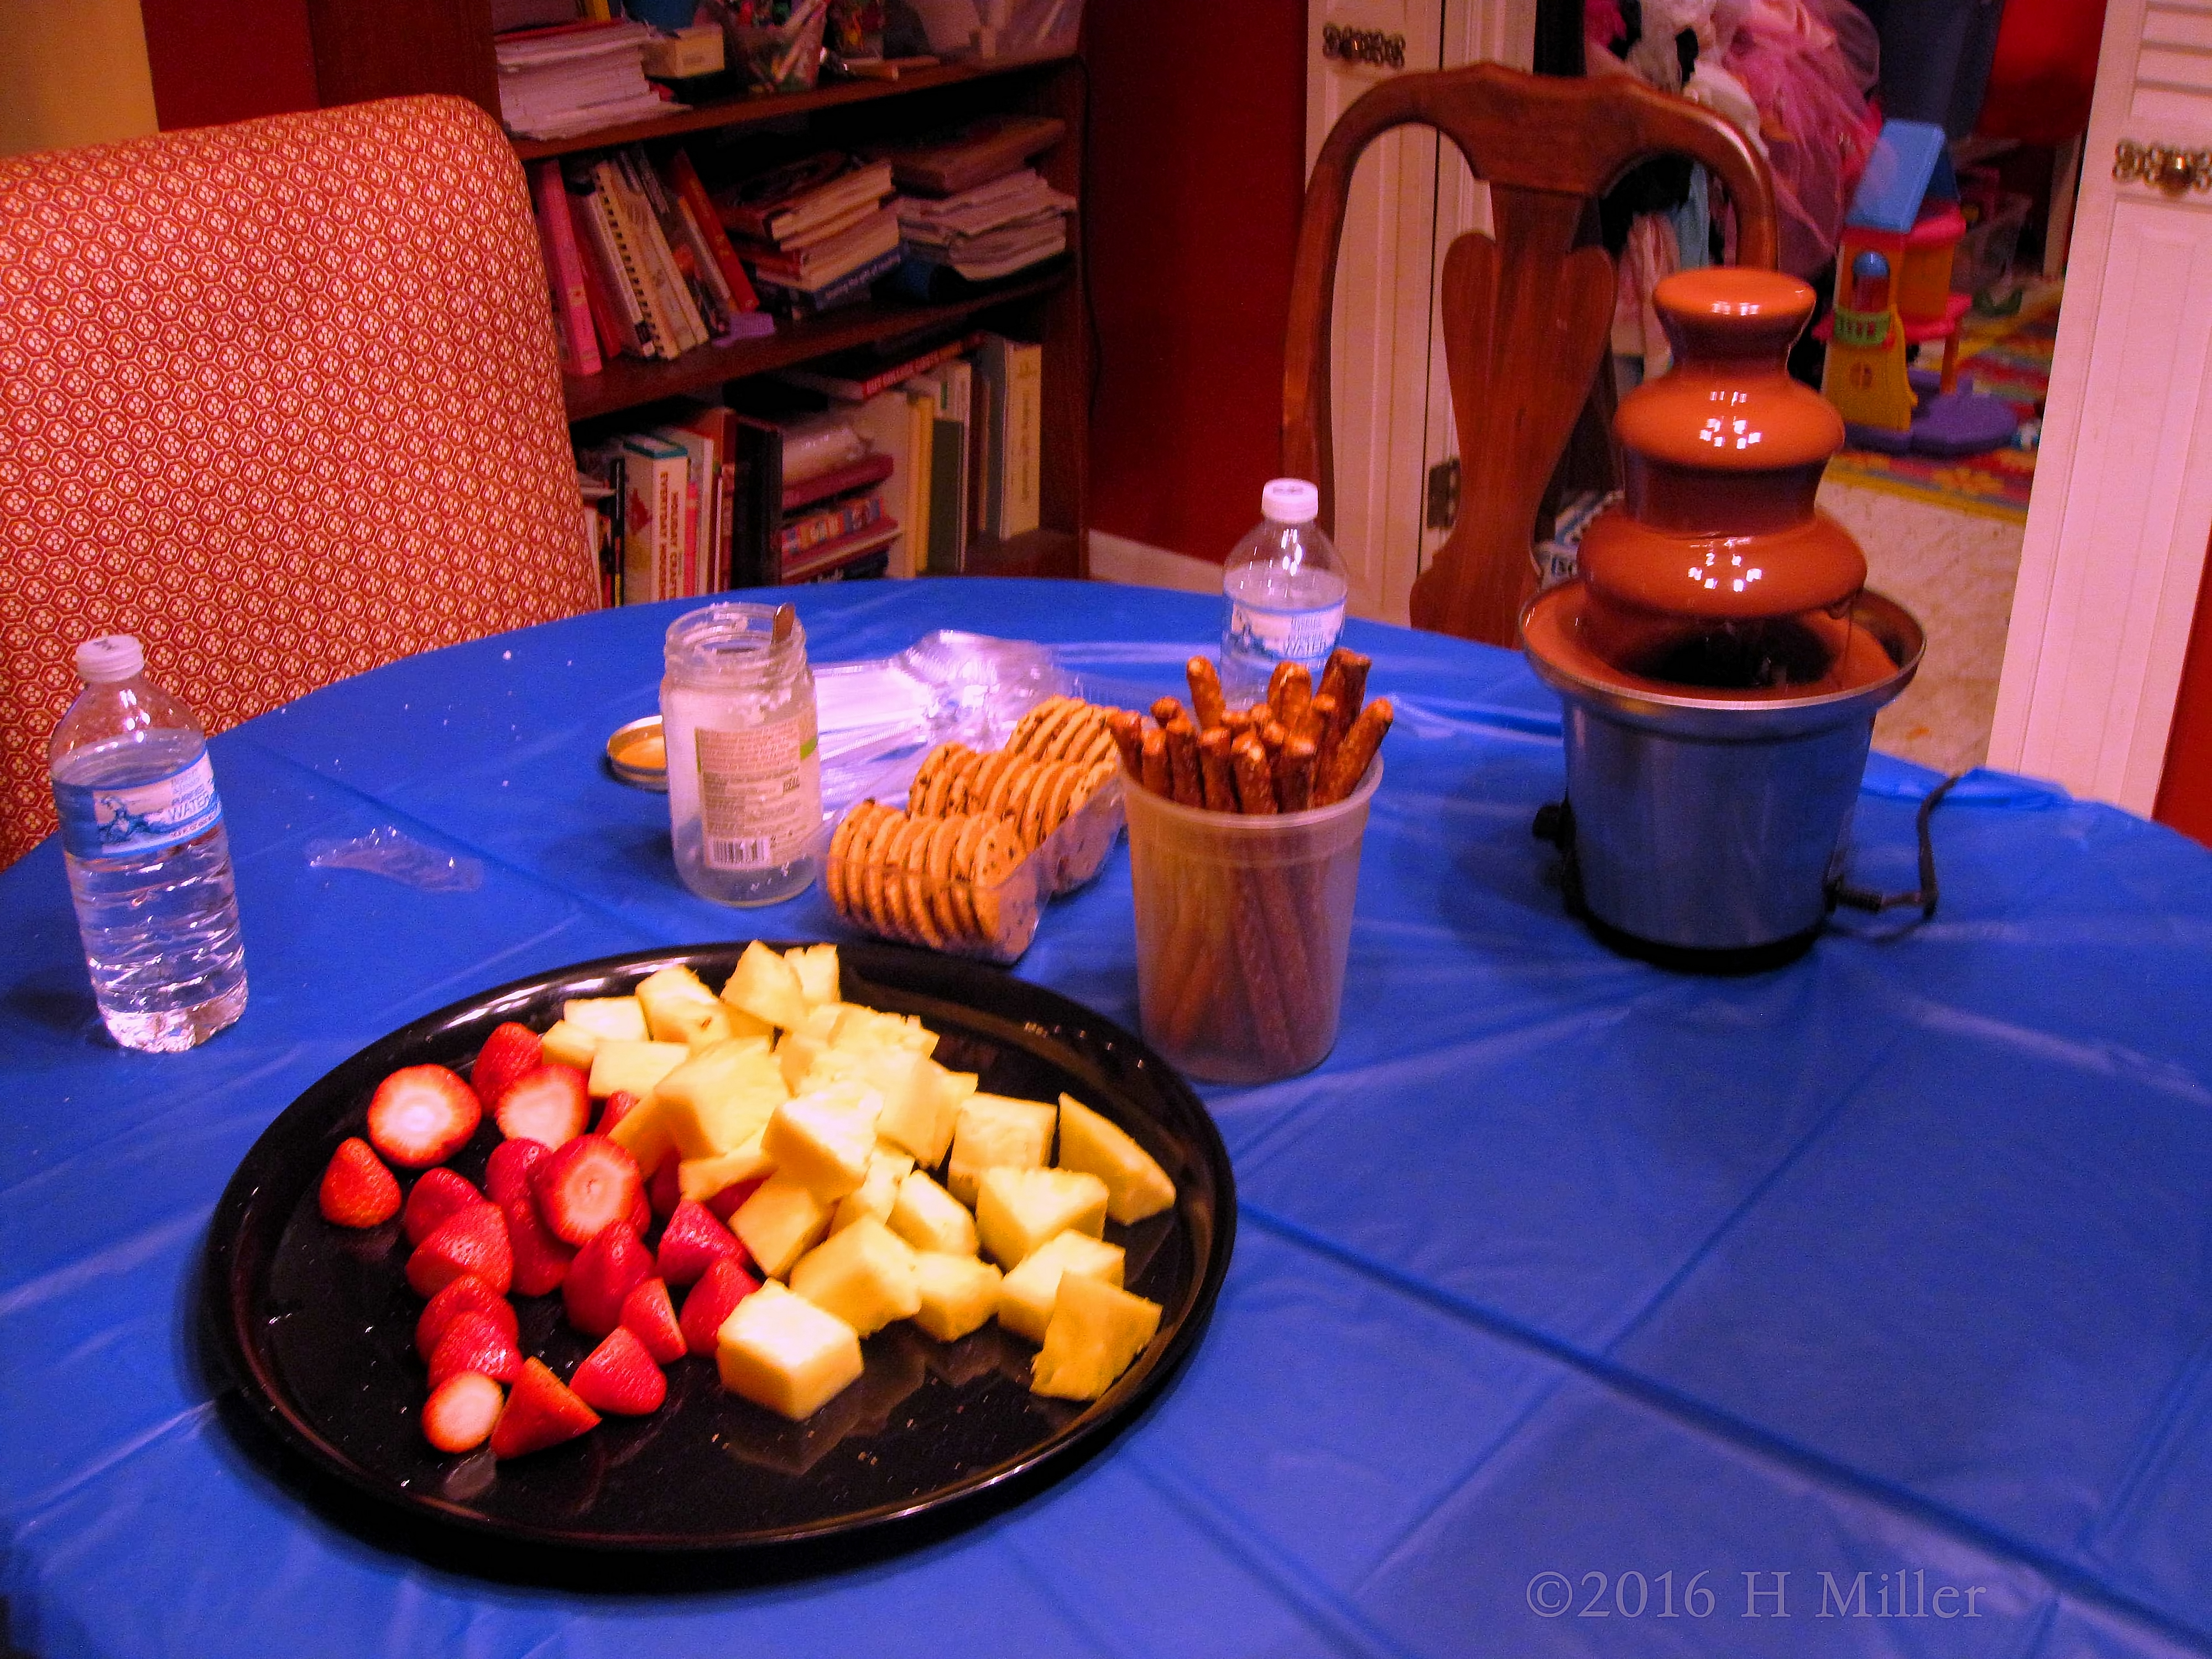 What Snacks Could Be Better Than A Chocolate Fondue With Pine And Berry Dips Along With Chocolate Chip Cookies!